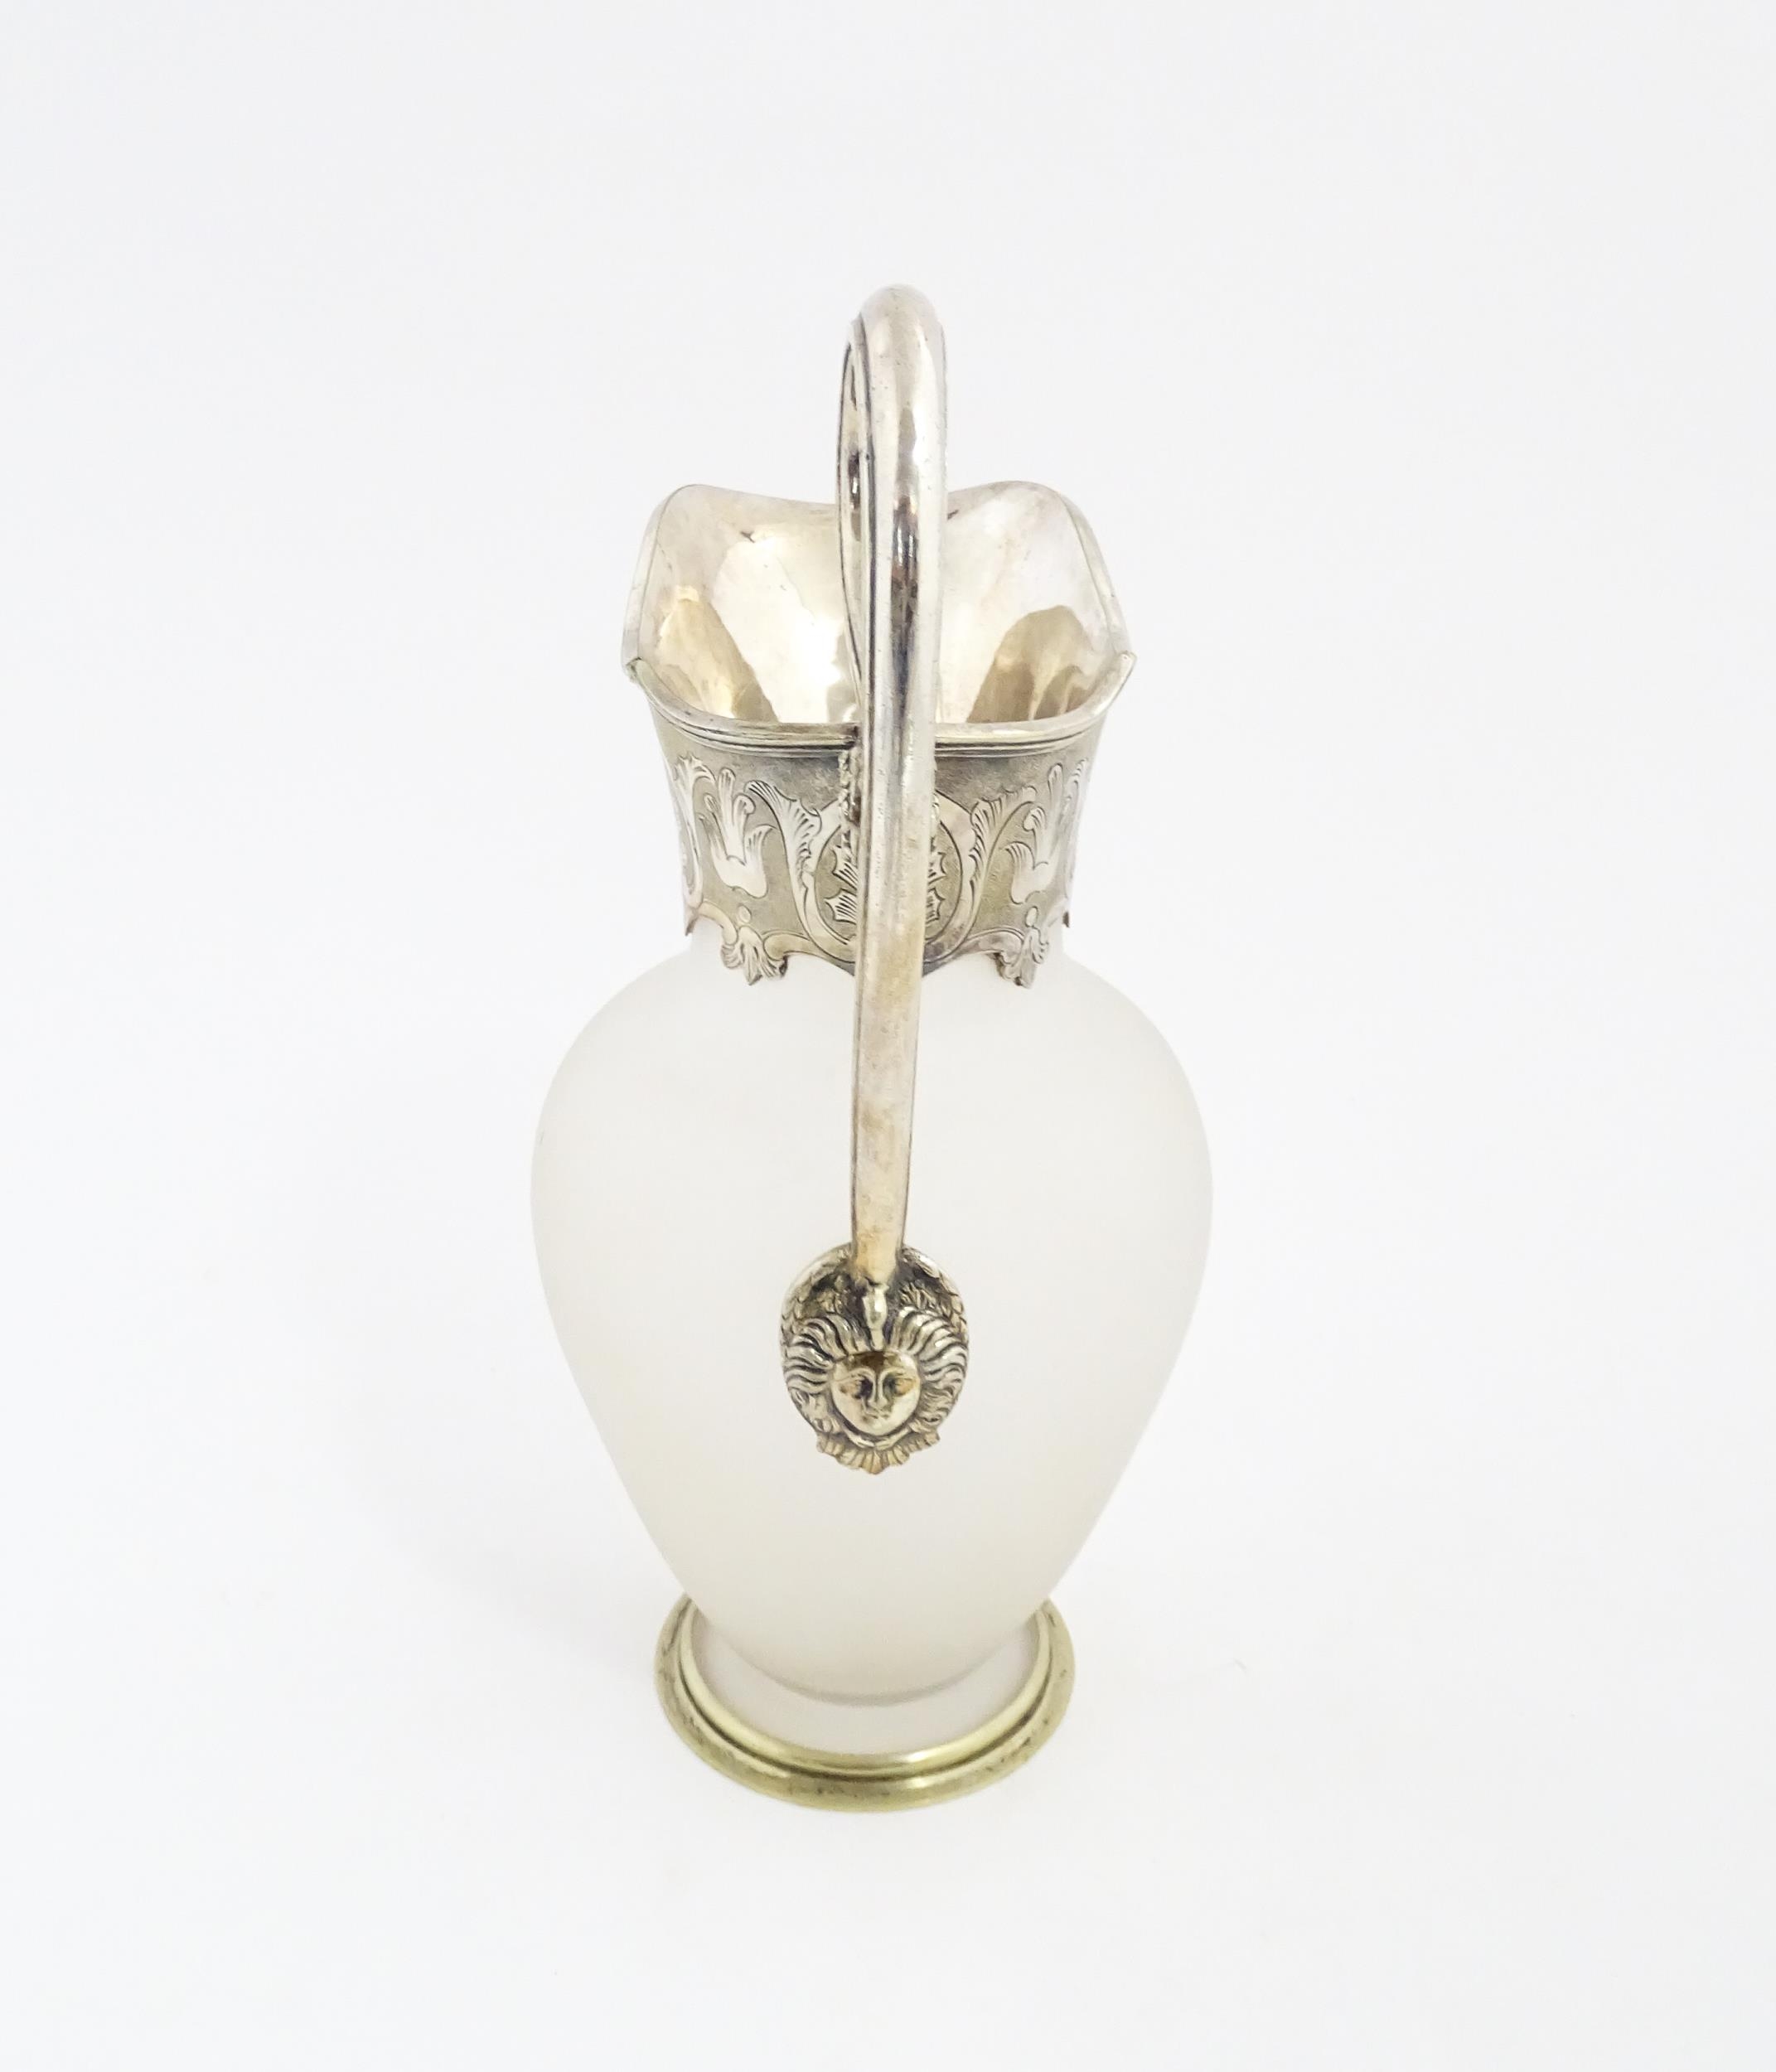 A Victorian frosted glass jug of ewer form with silver plate handle and mounts. Approx. 11 1/2" high - Image 5 of 6